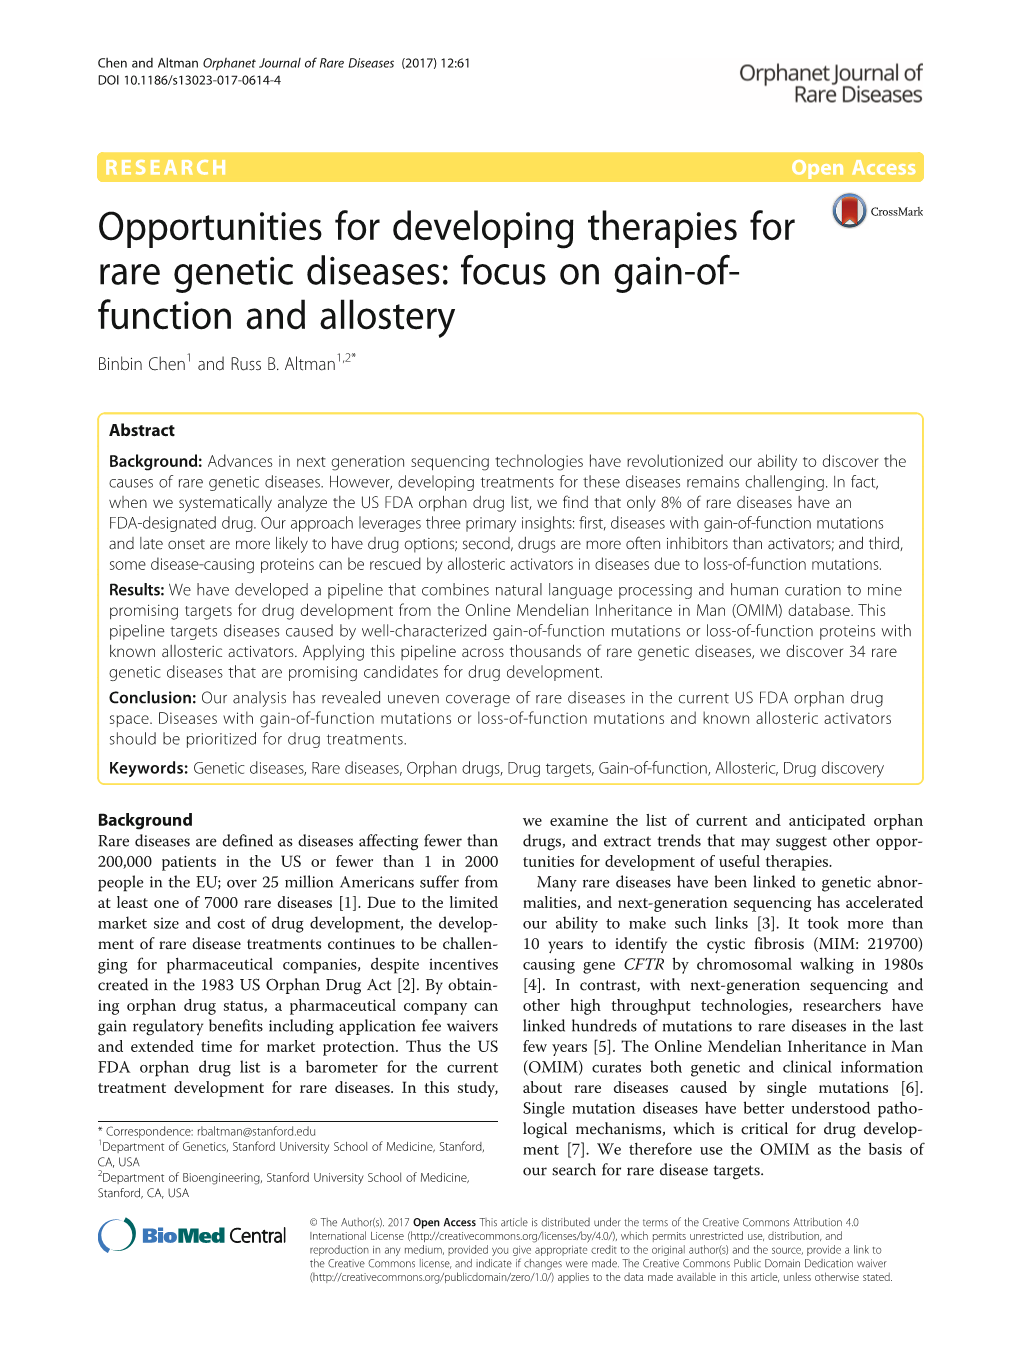 Opportunities for Developing Therapies for Rare Genetic Diseases: Focus on Gain-Of- Function and Allostery Binbin Chen1 and Russ B